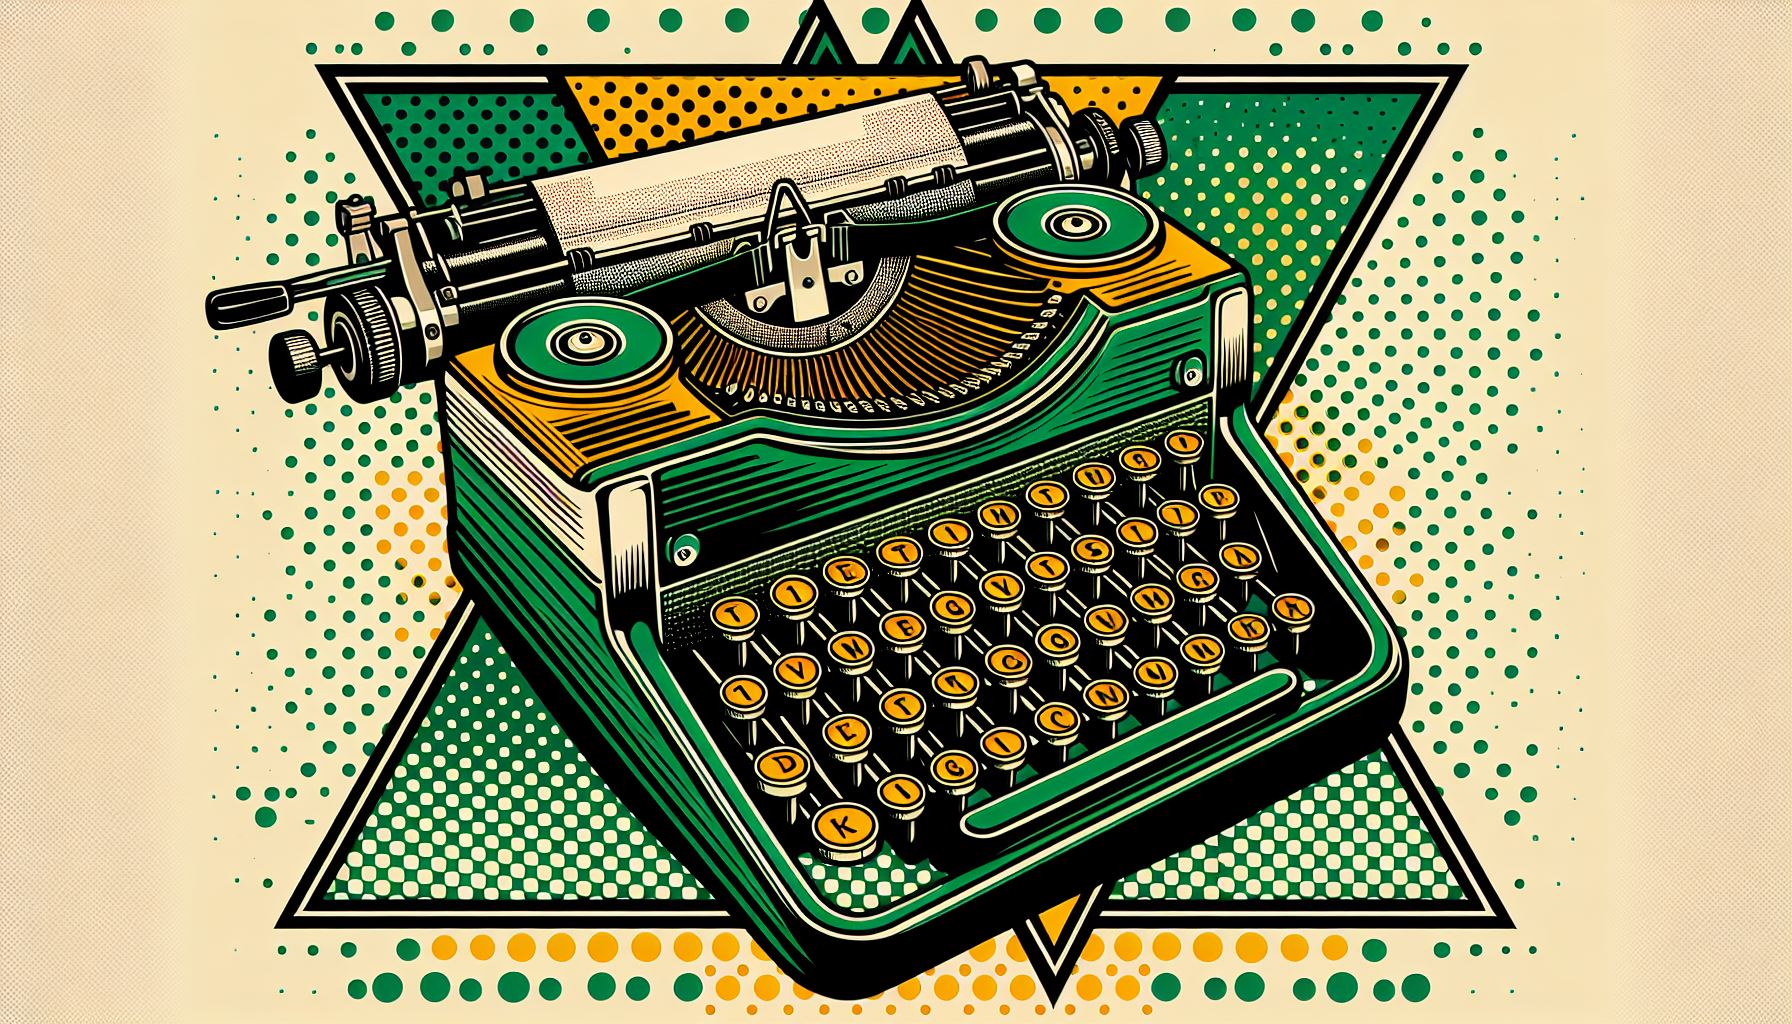 A vibrant 16:9 pop art depiction of a vintage typewriter. The typewriter is adorned with green and yellow accents, and in the background, an inverted triangle adds a touch of intrigue.